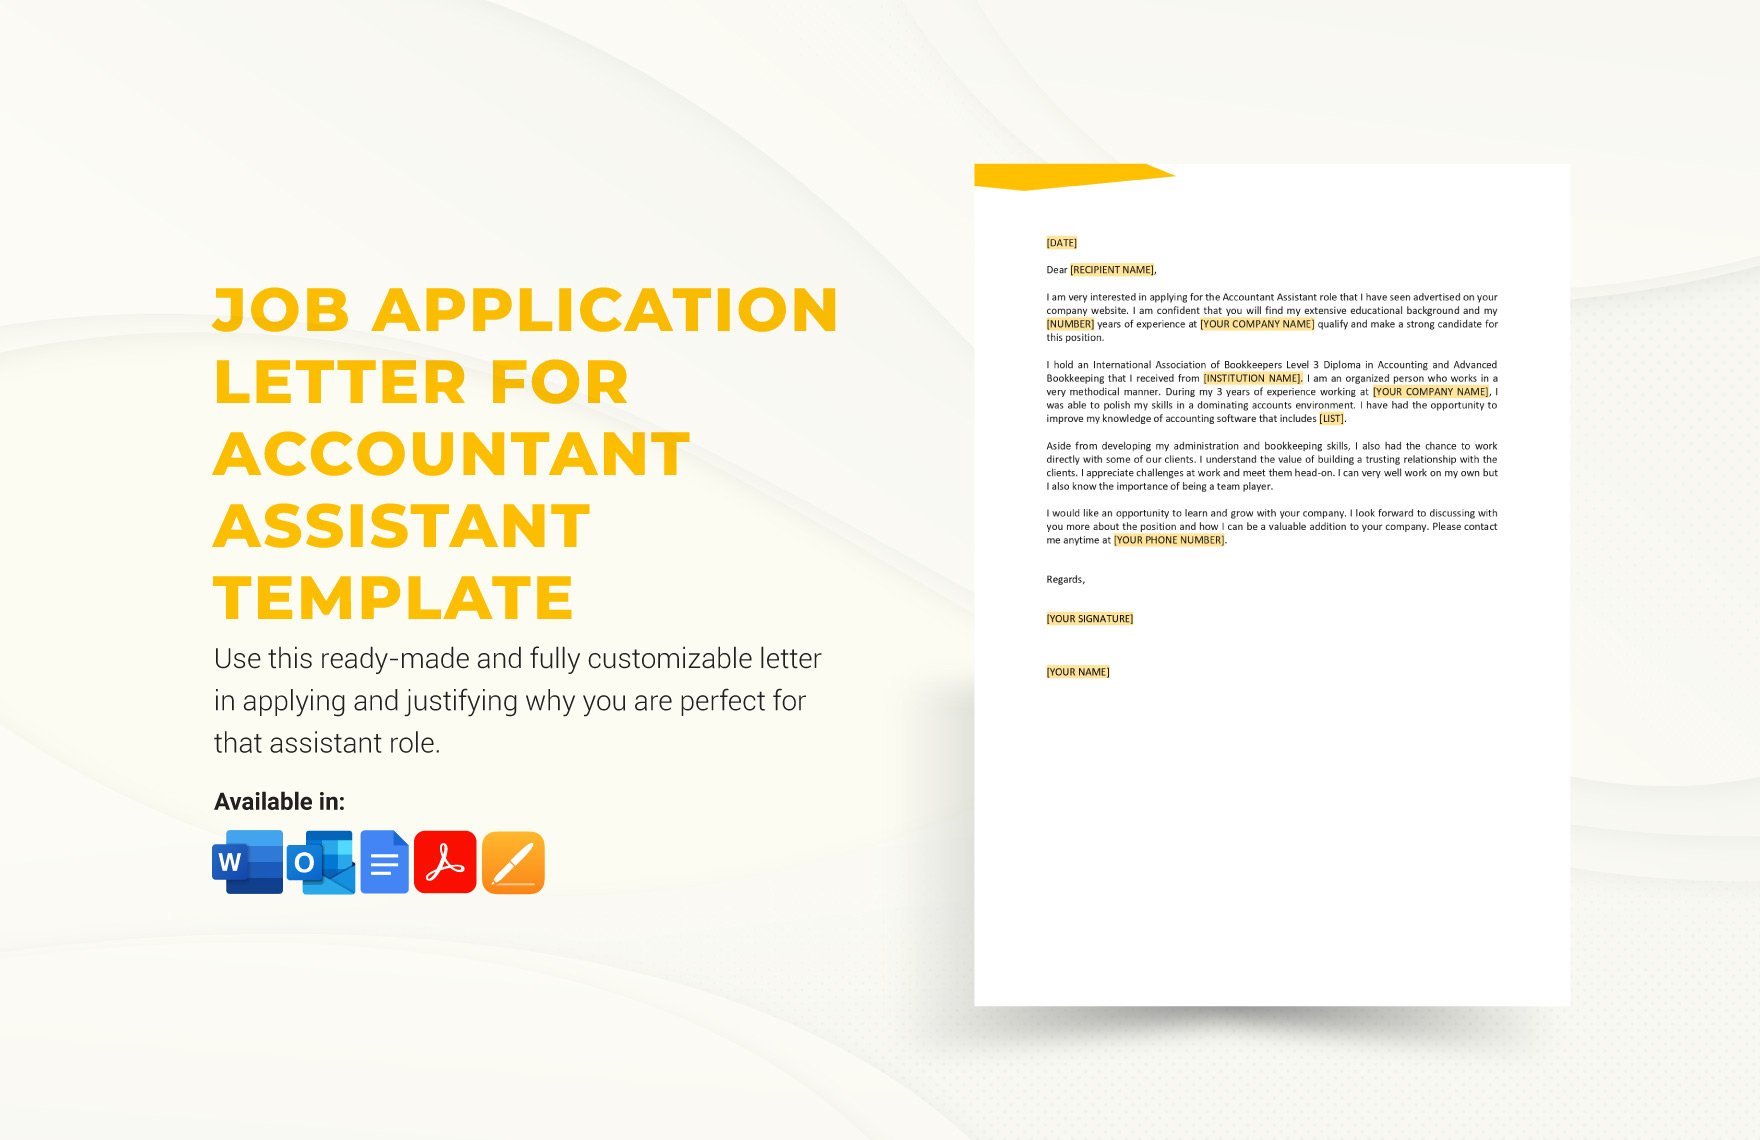 Job Application Letter For Accountant Assistant